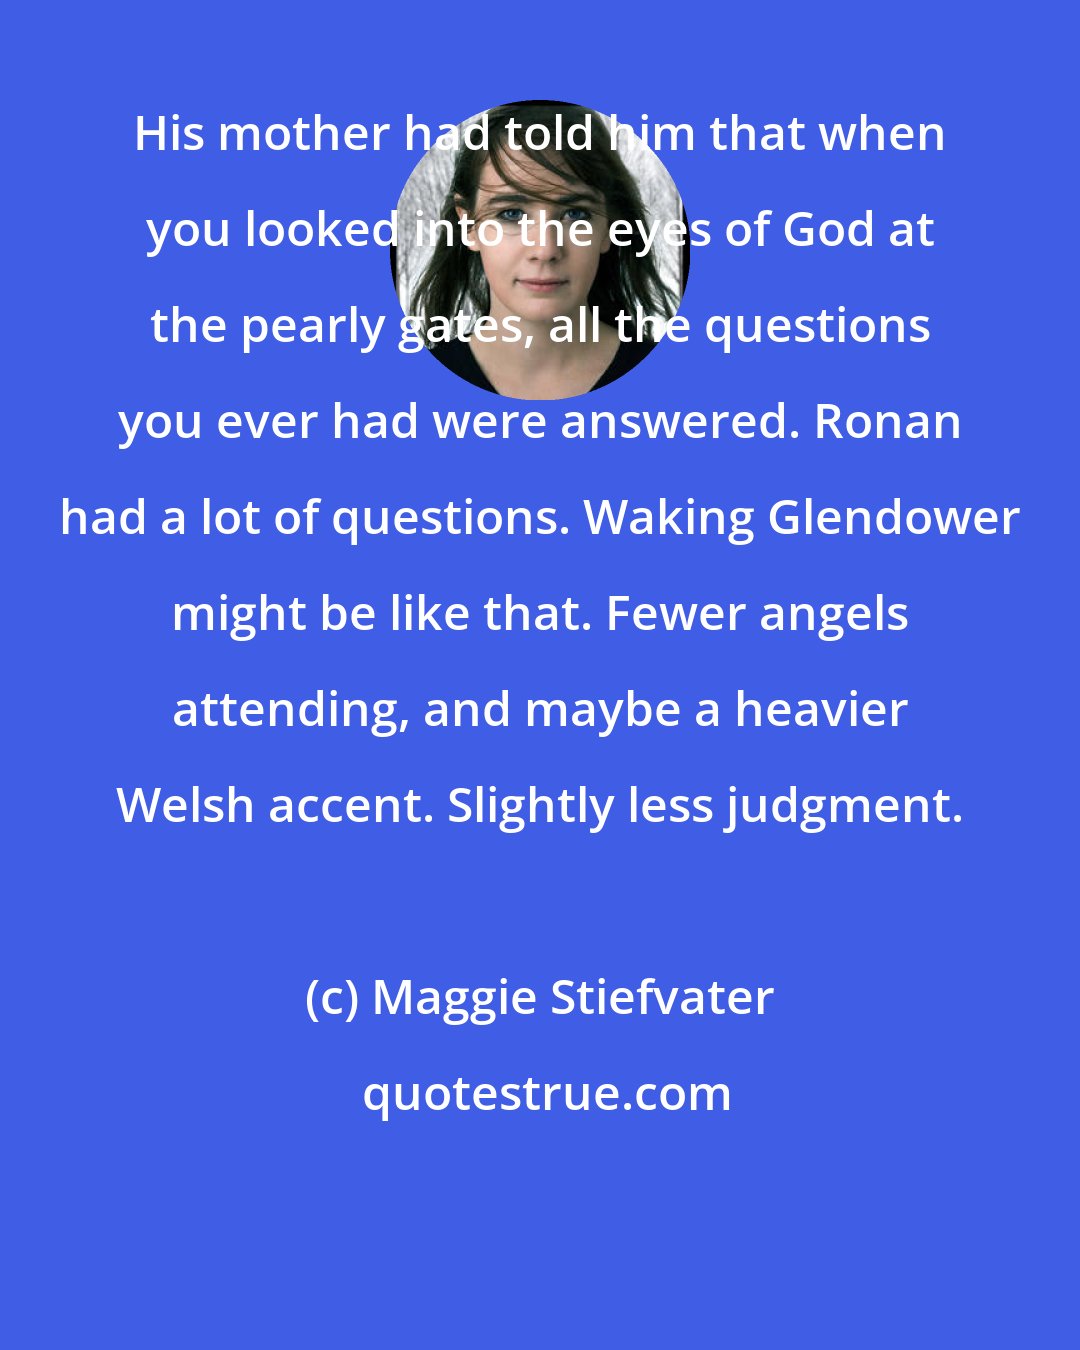 Maggie Stiefvater: His mother had told him that when you looked into the eyes of God at the pearly gates, all the questions you ever had were answered. Ronan had a lot of questions. Waking Glendower might be like that. Fewer angels attending, and maybe a heavier Welsh accent. Slightly less judgment.